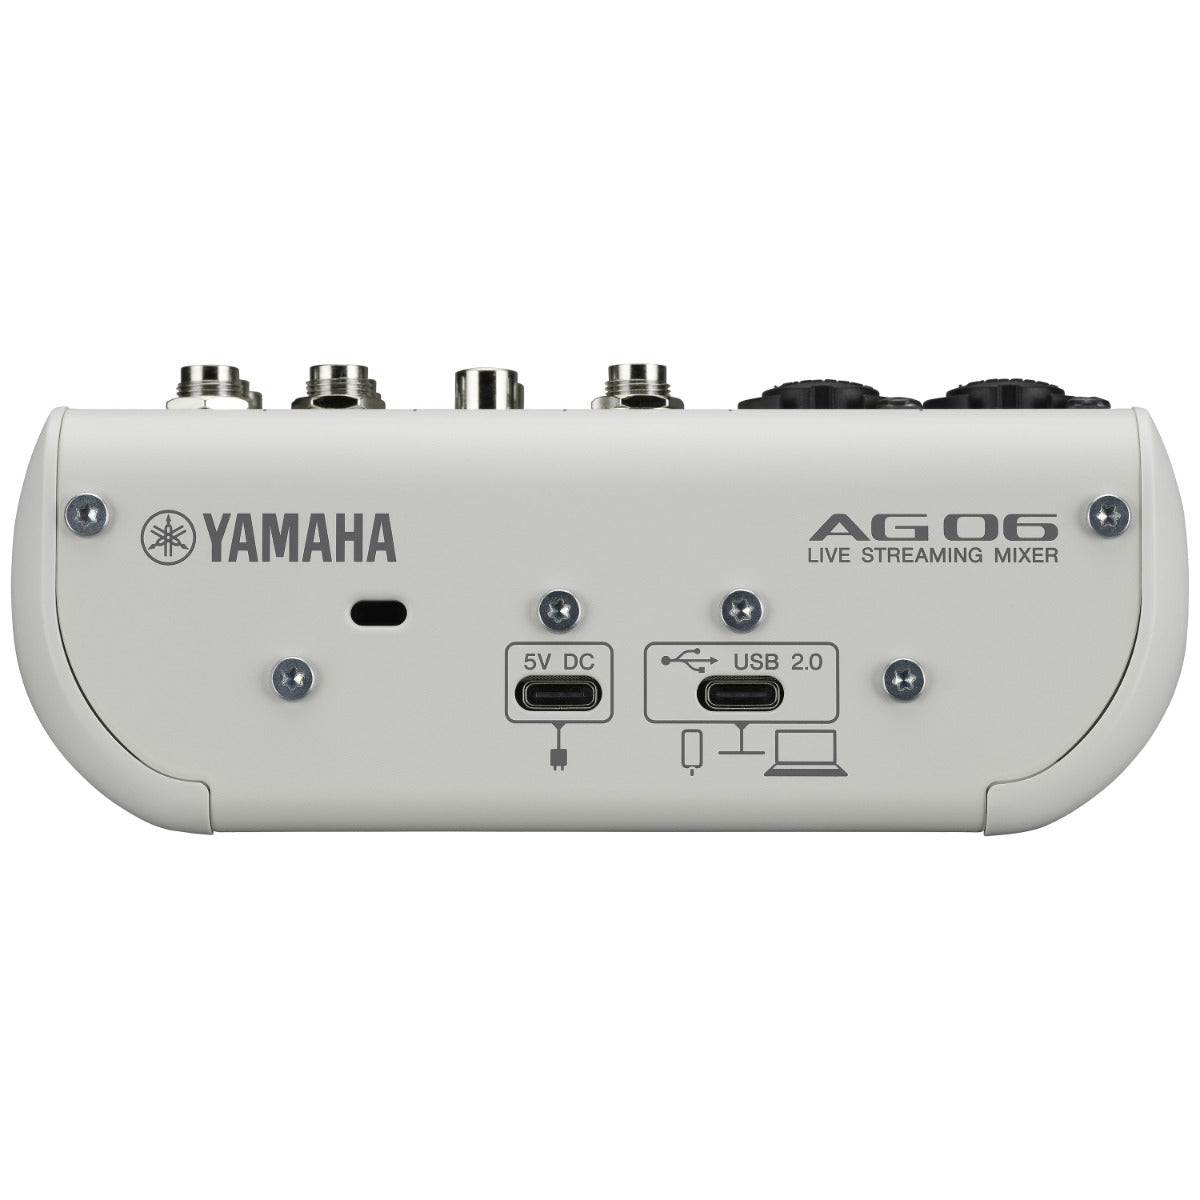 Yamaha AG06 Mk2 Live Streaming Mixer and USB Audio Interface - White view 3